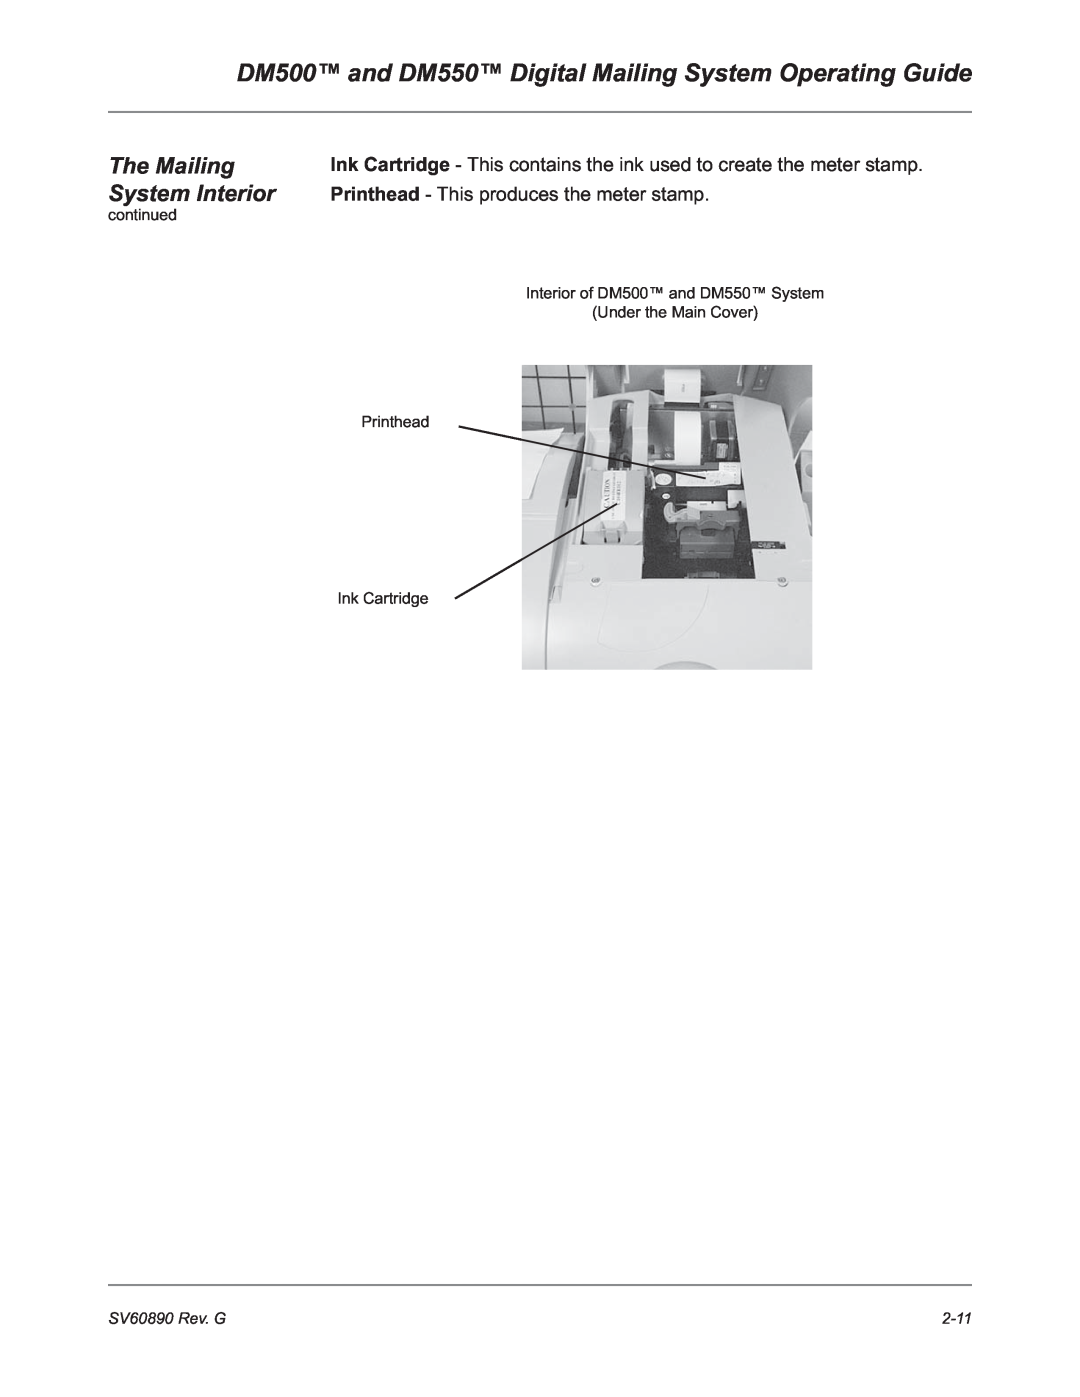 Pitney Bowes DM500 and DM550 Digital Mailing System Operating Guide, The Mailing System Interior, SV60890 Rev. G, 2-11 